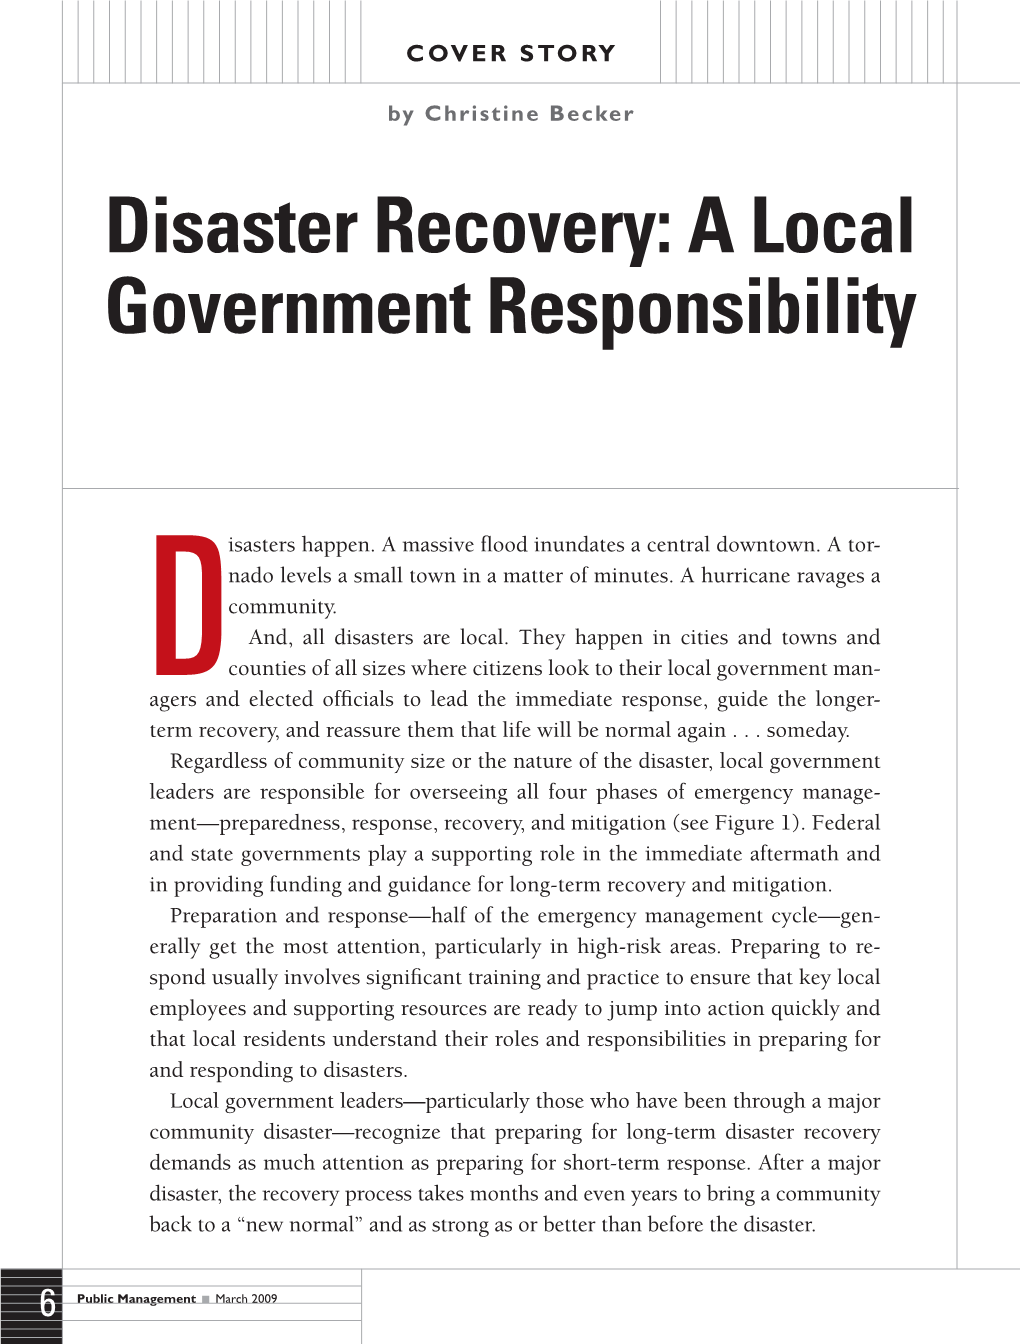 Disaster Recovery: a Local Government Responsibility